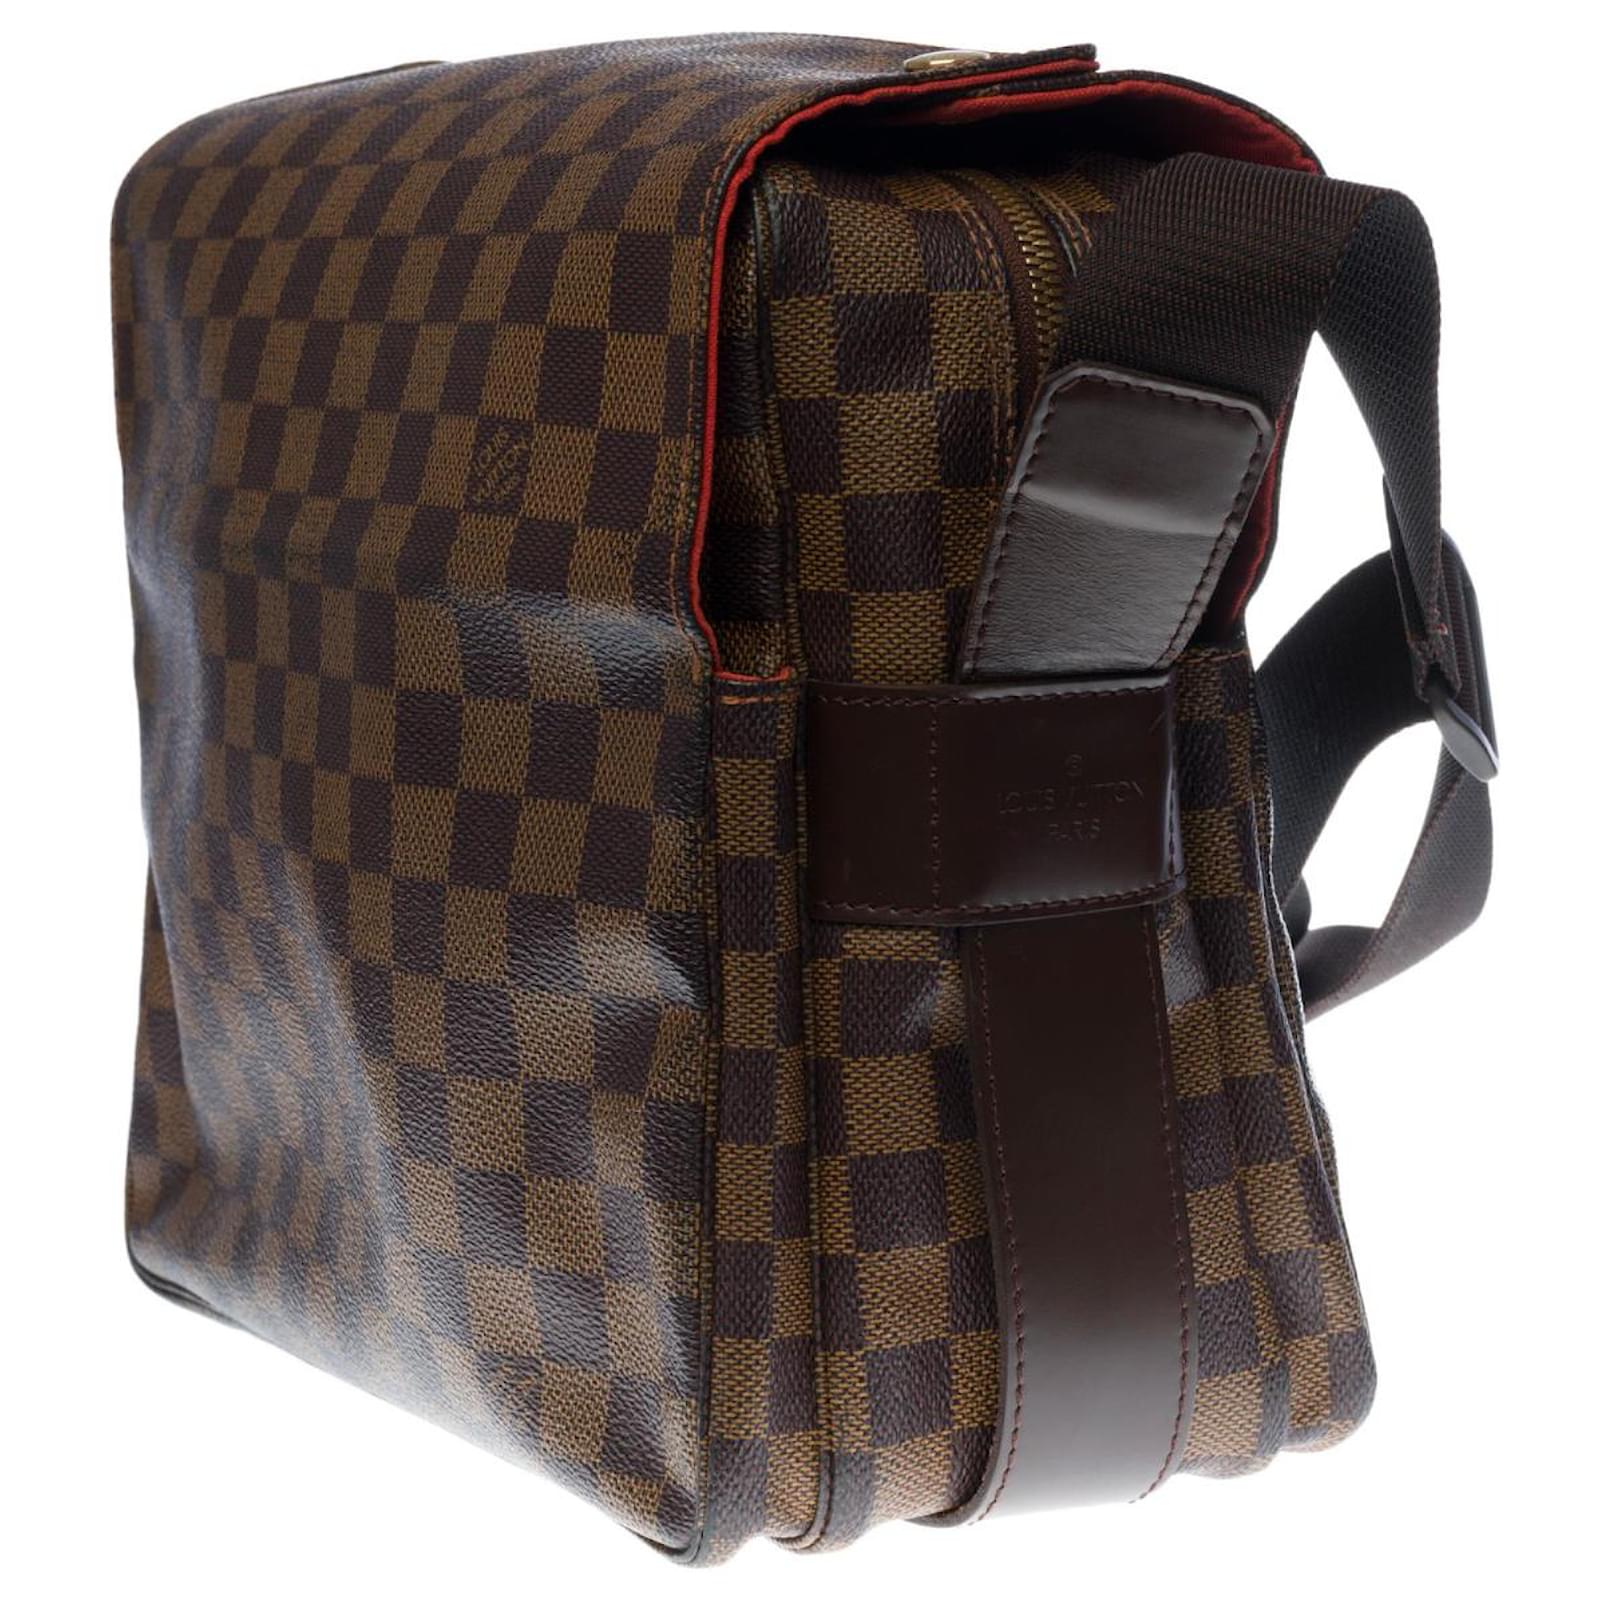 Louis Vuitton Tote in brown checkered canvas and brown leather